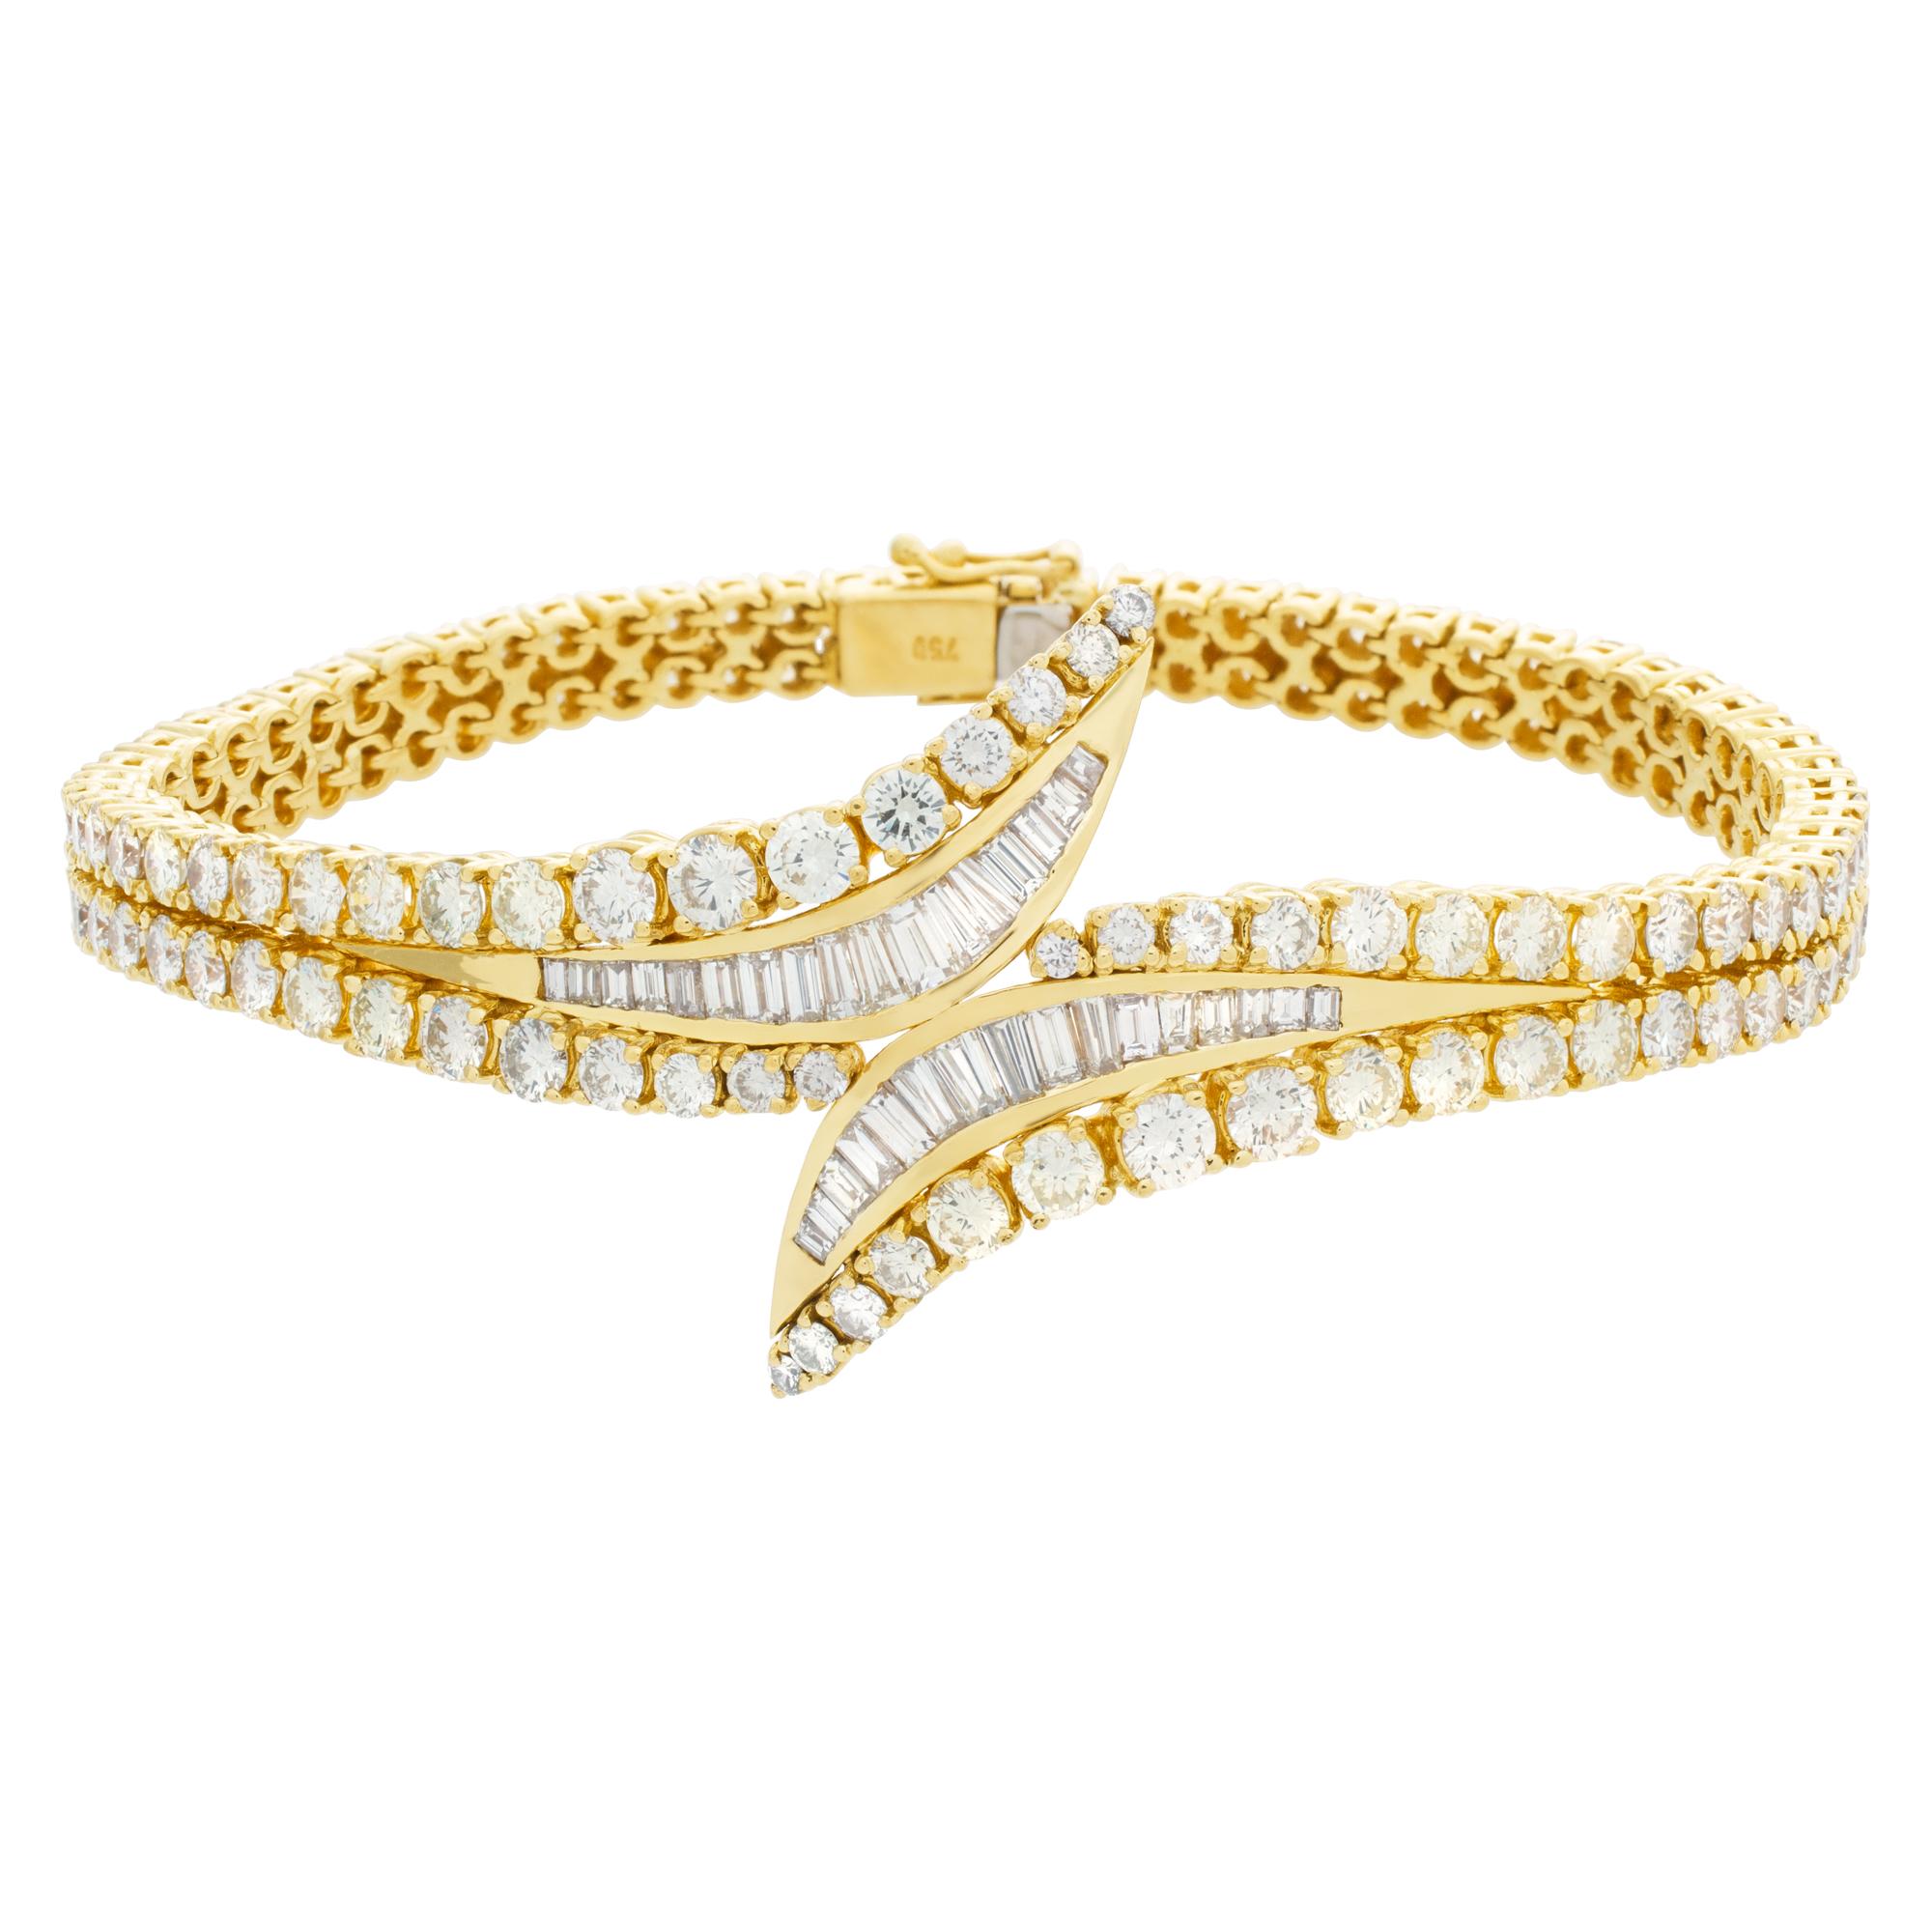 Bracelet in 18k Yellow Gold with over 9 Carats in Round Brilliant Cut Diamonds For Sale 4